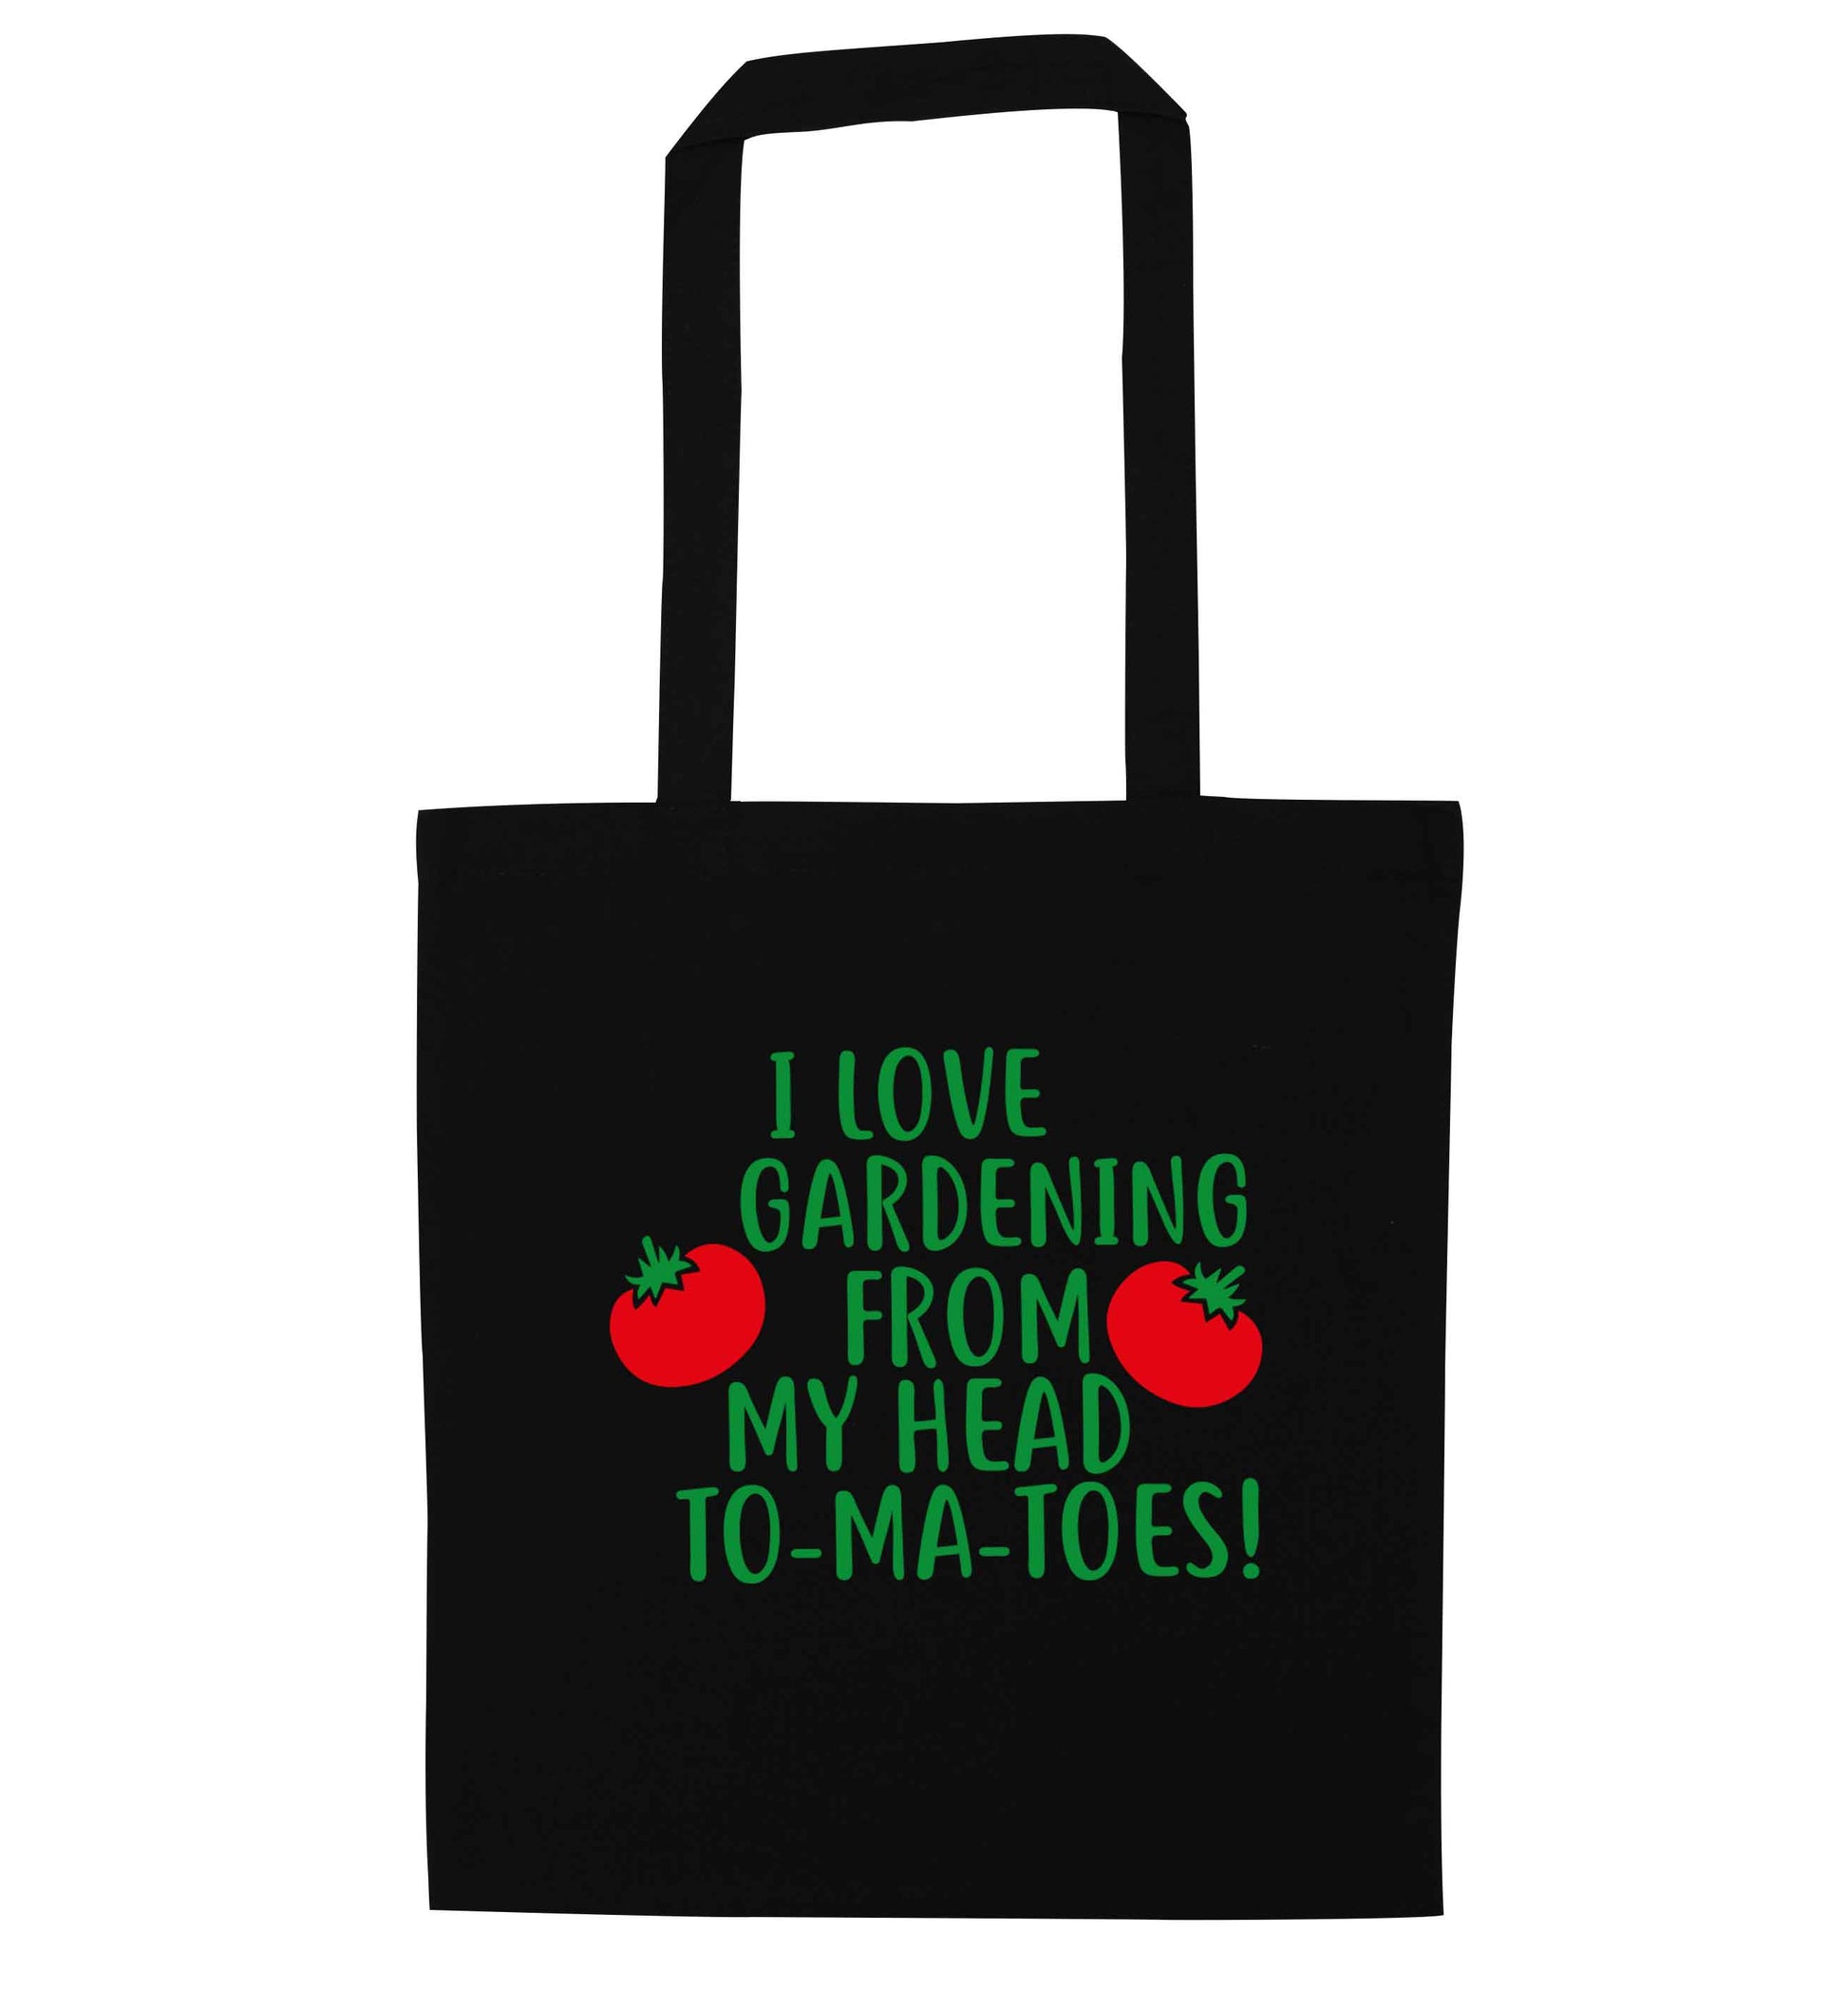 I love gardening from my head to-ma-toes black tote bag